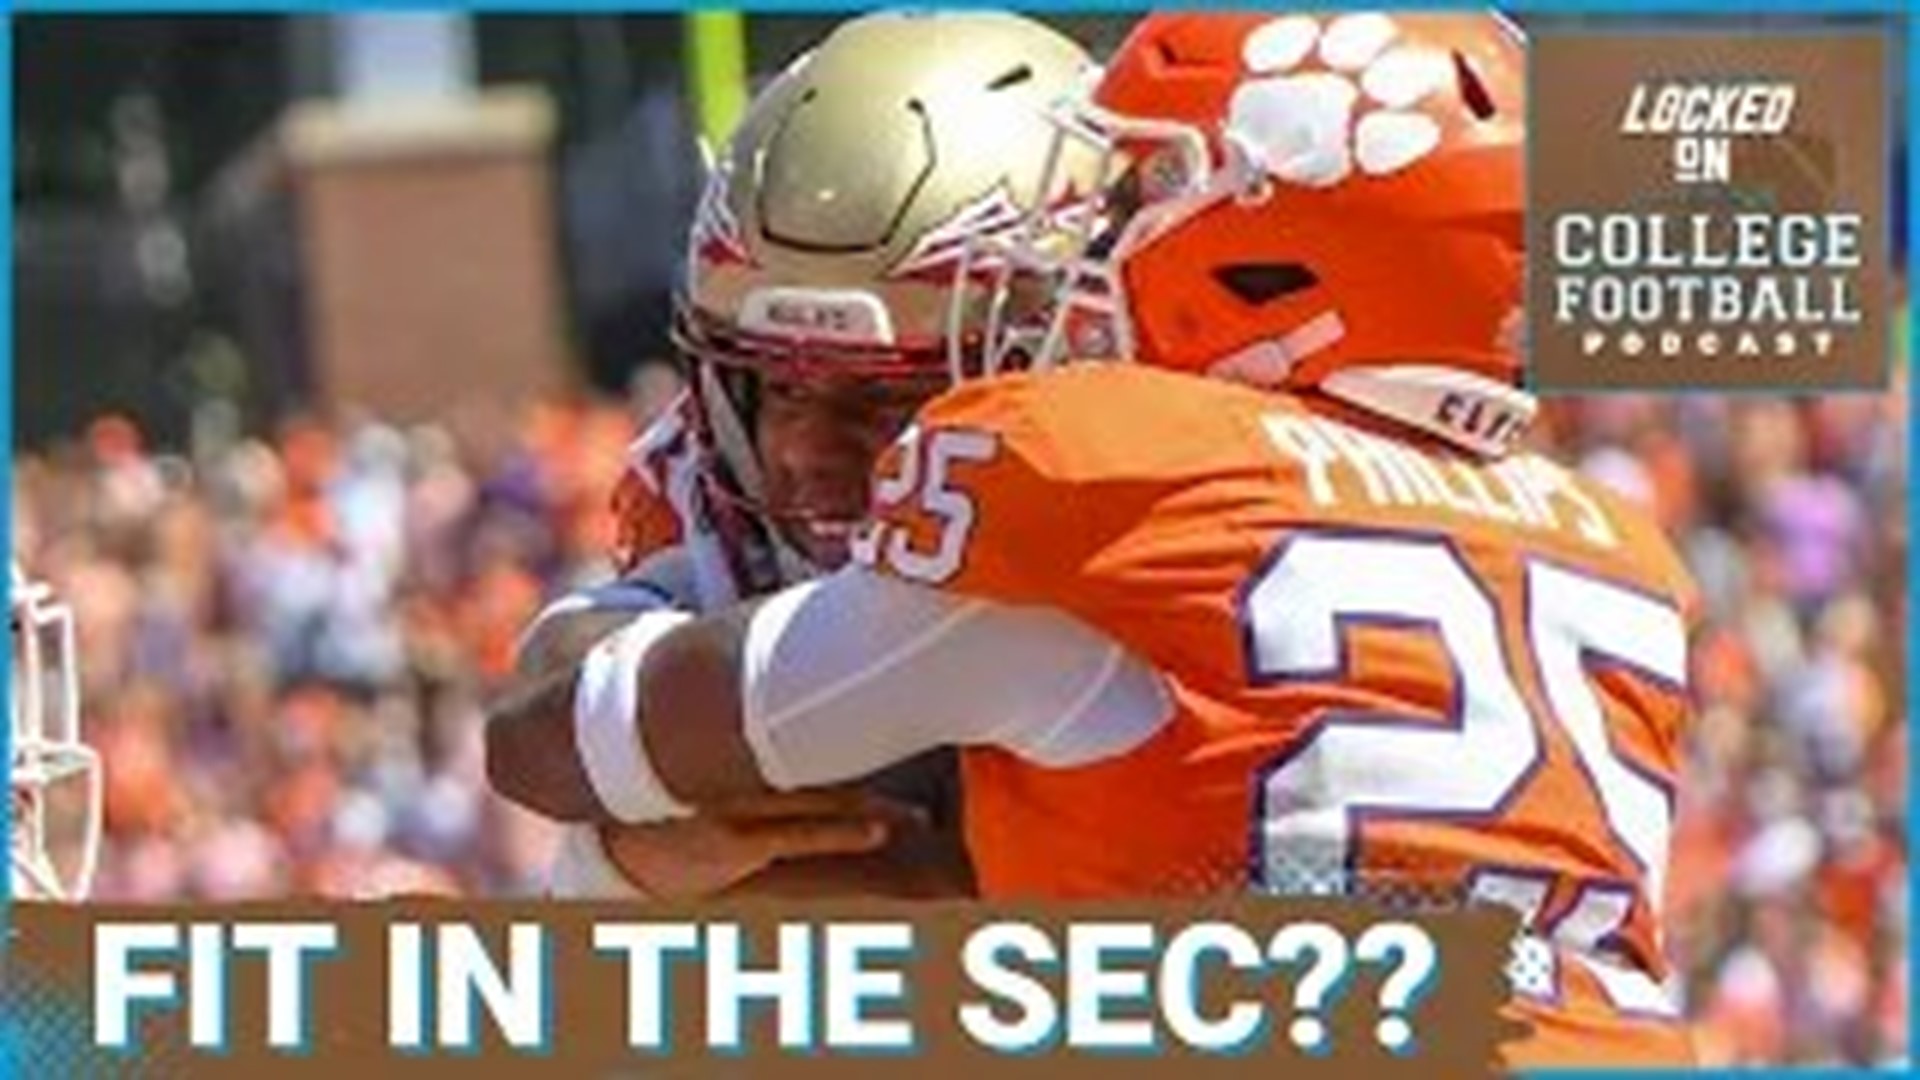 Clemson and Florida State continue their pursuits to get out of the ACC to find a home in the Big 10 or the SEC. Would the SEC that's already expanded, want more?